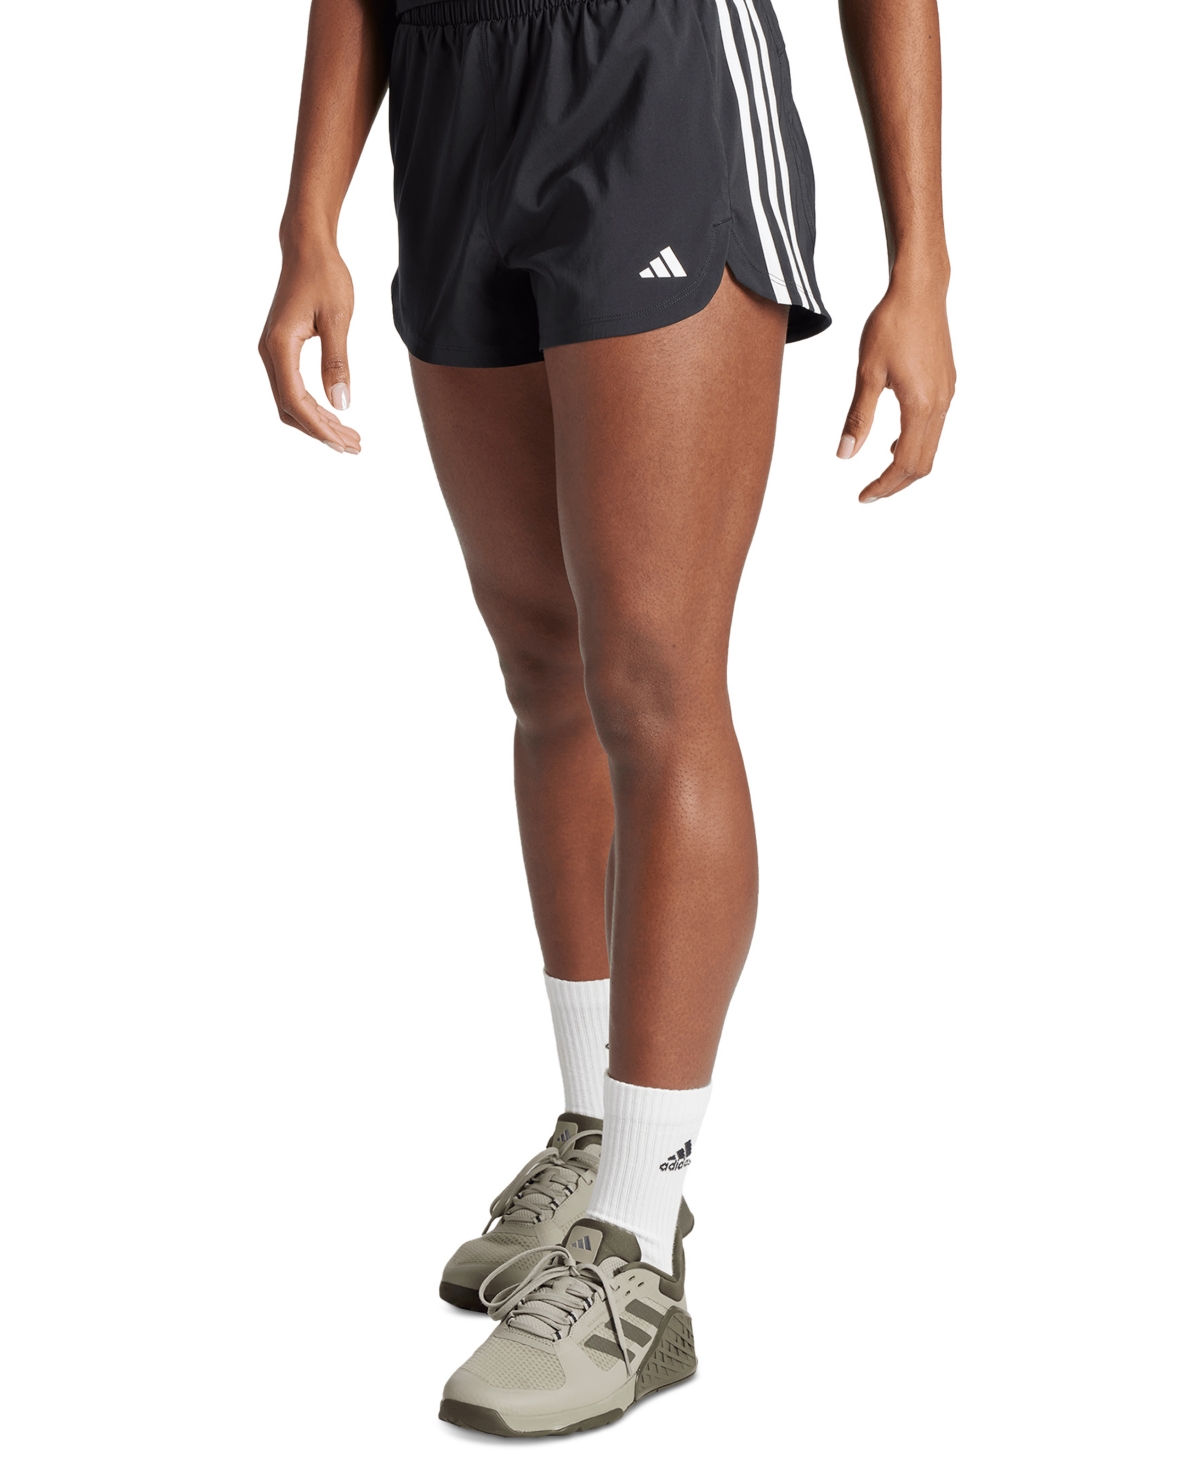 Adidas Originals Women's Pacer Training 3-stripes Woven High-rise Shorts In Black,white